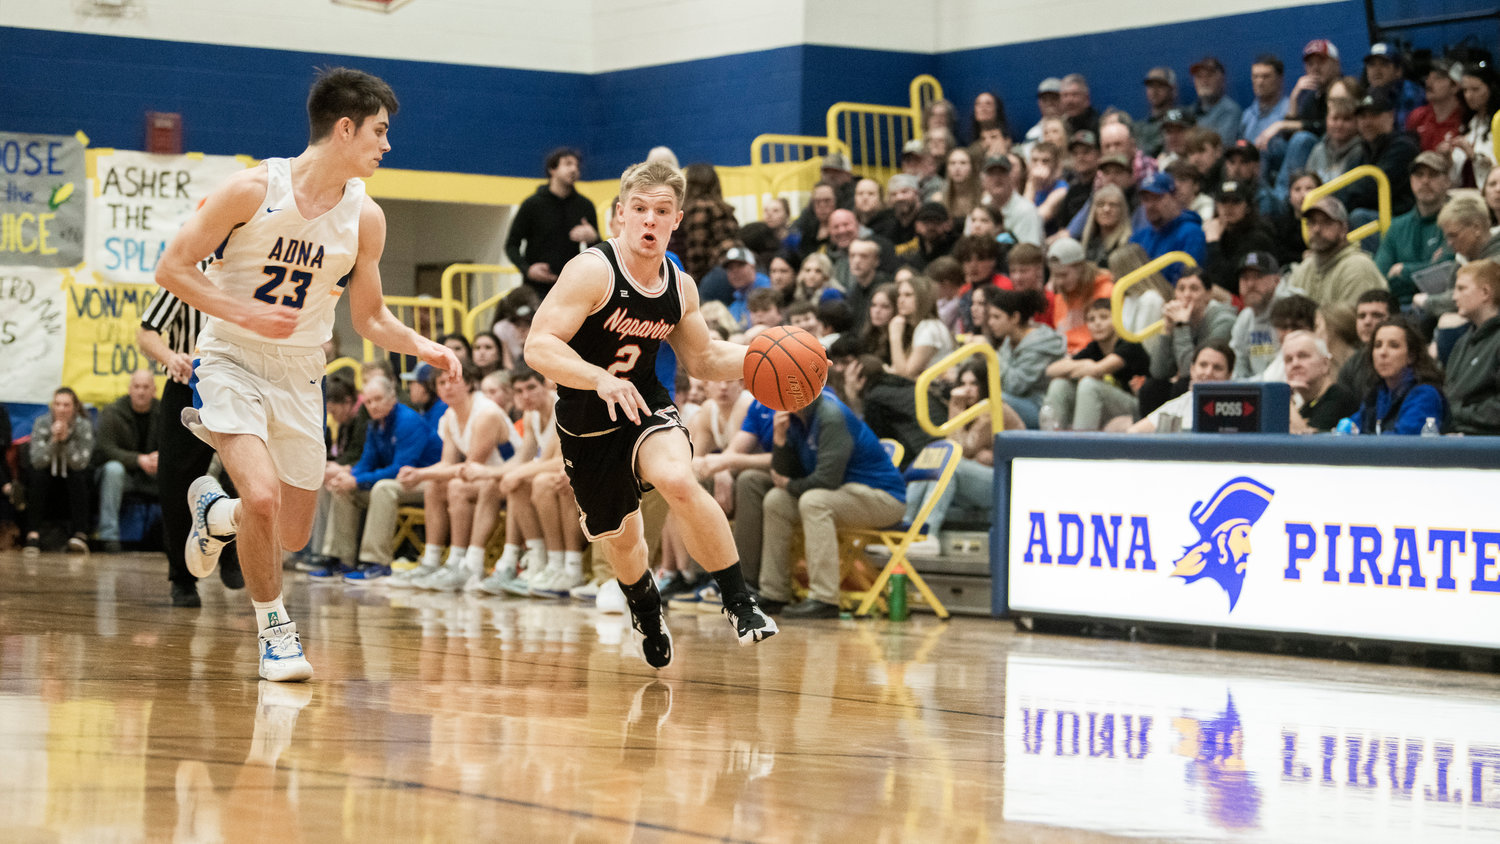 Napavine junior Cael Stanley (2) dribbles toward the hoop during a game against Adna on Thursday.